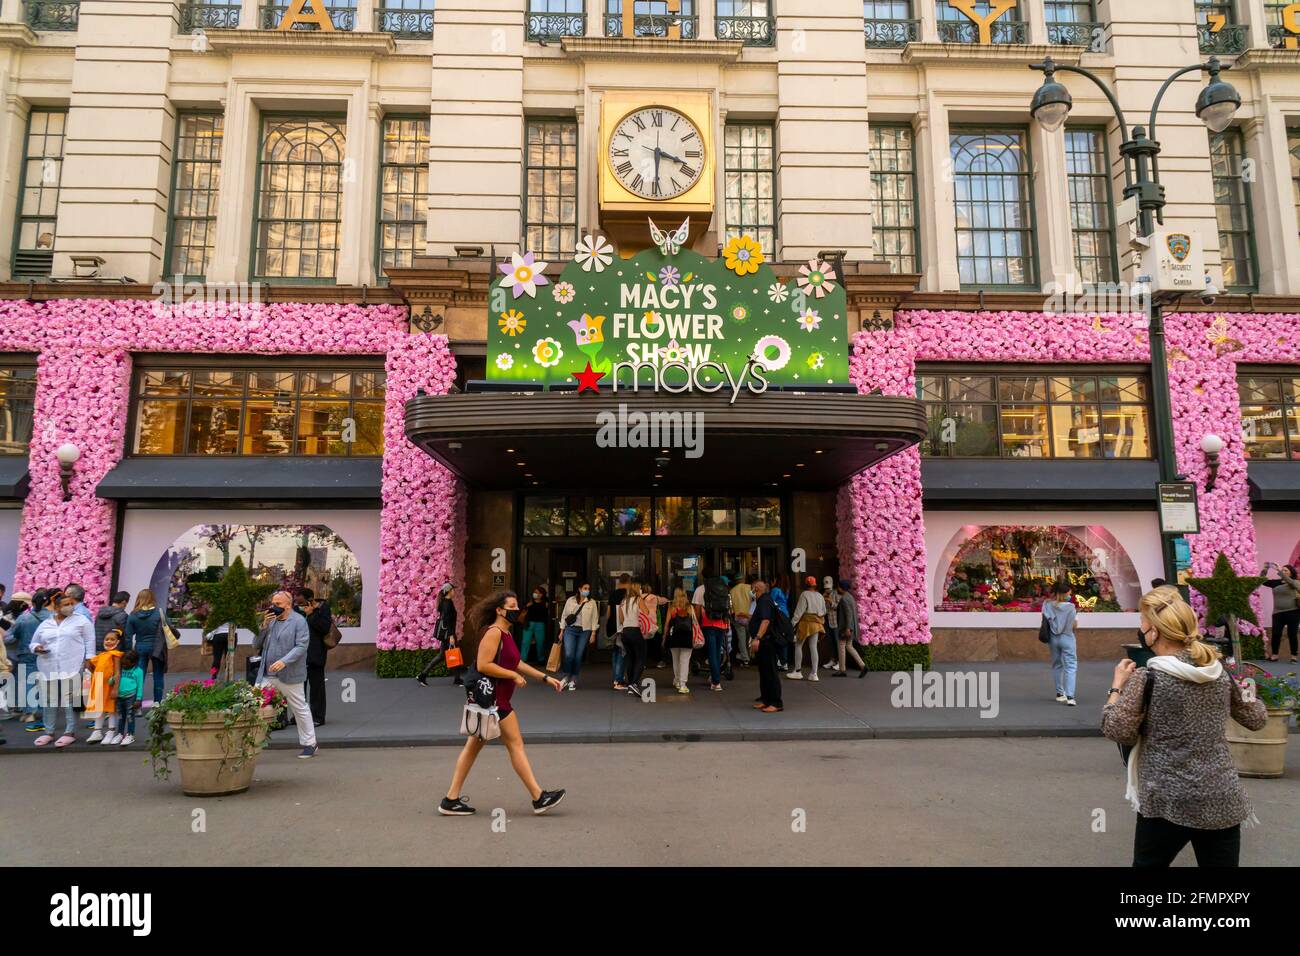 Visitors outside Macy's flagship department store in Herald Square in New  York which is festooned with floral arrangements for the annual Macy's  Flower Show, on opening day Sunday, April 2, 2021. Visitors